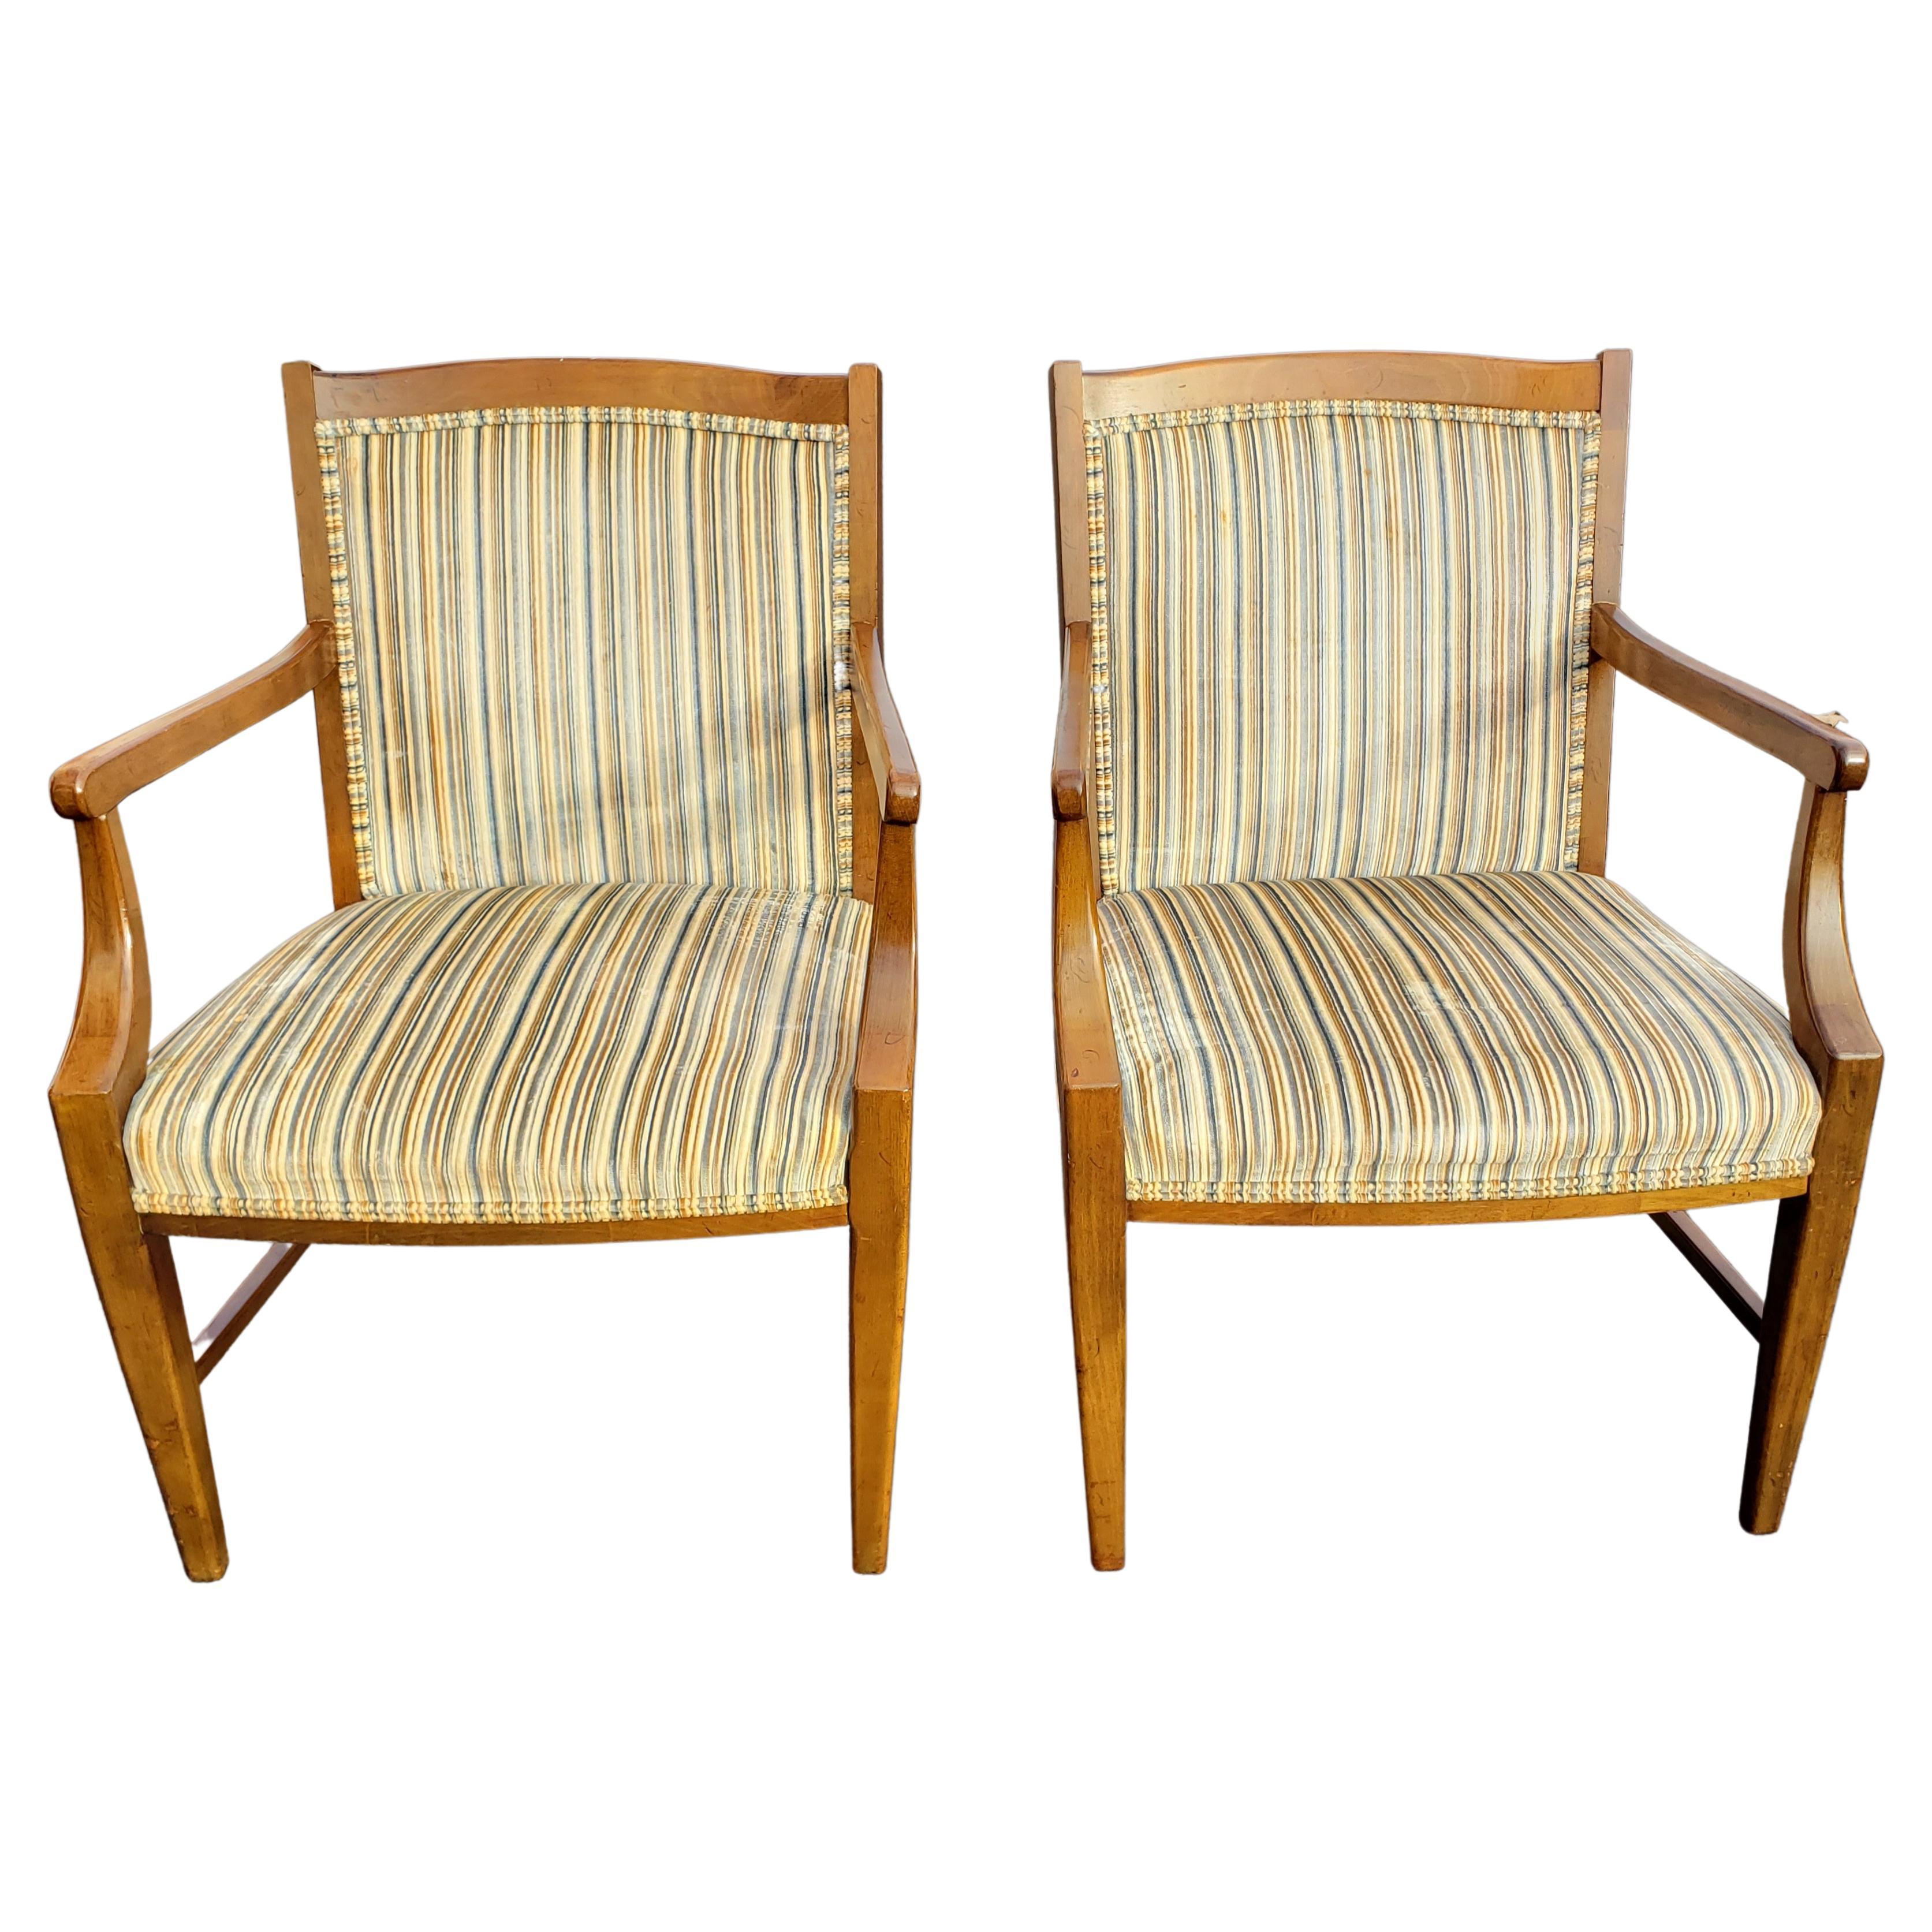 Stateville Ross Upholstered Maple Armchairs, circa 1970s, a Pair